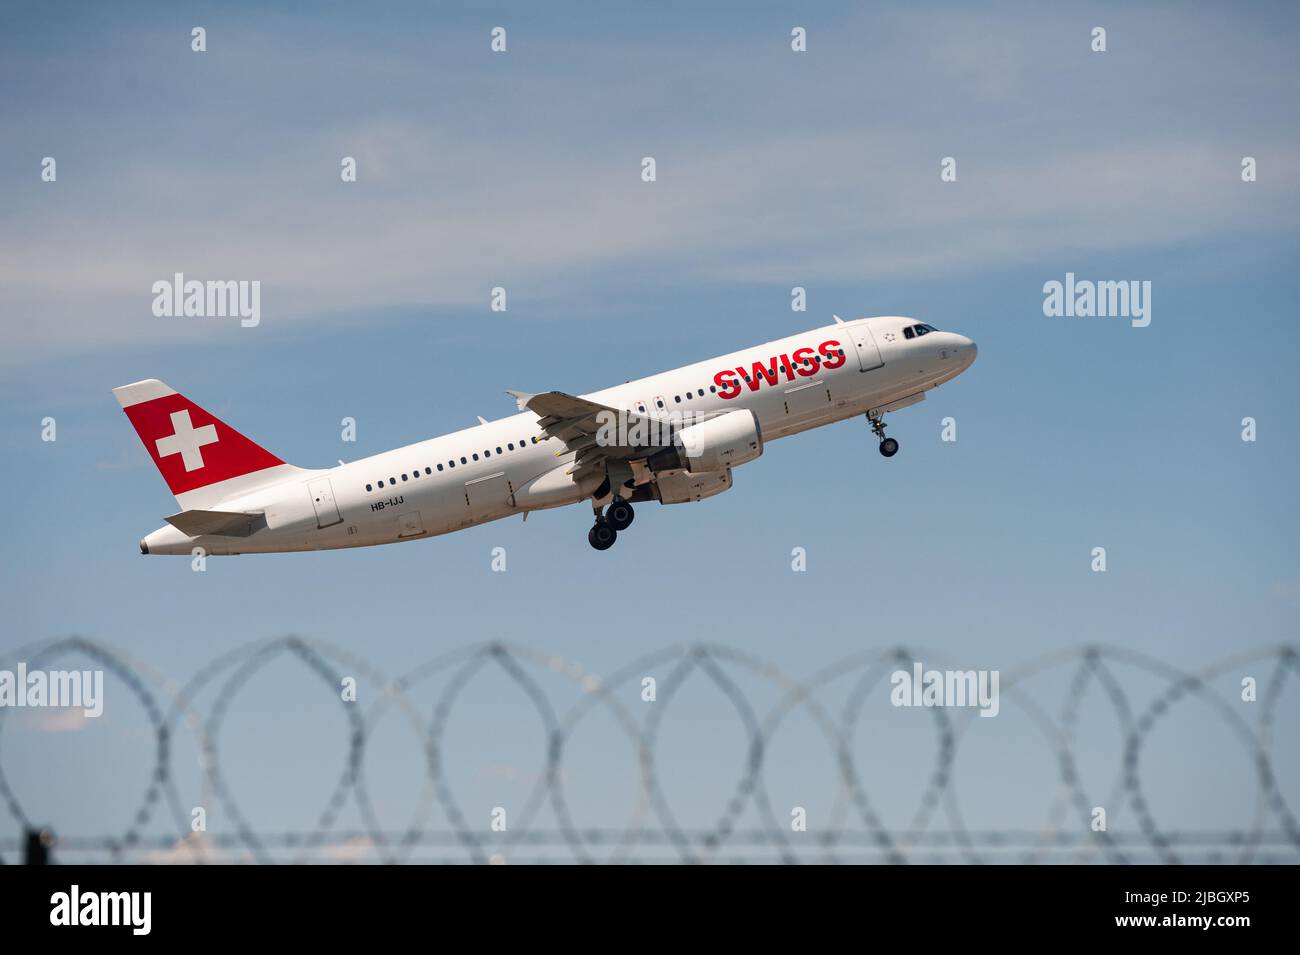 03.06.2022, Berlin, Germany, Europe - A Swiss Airlines Airbus A320 passenger aircraft takes off from Berlin Brandenburg Airport BER. Stock Photo